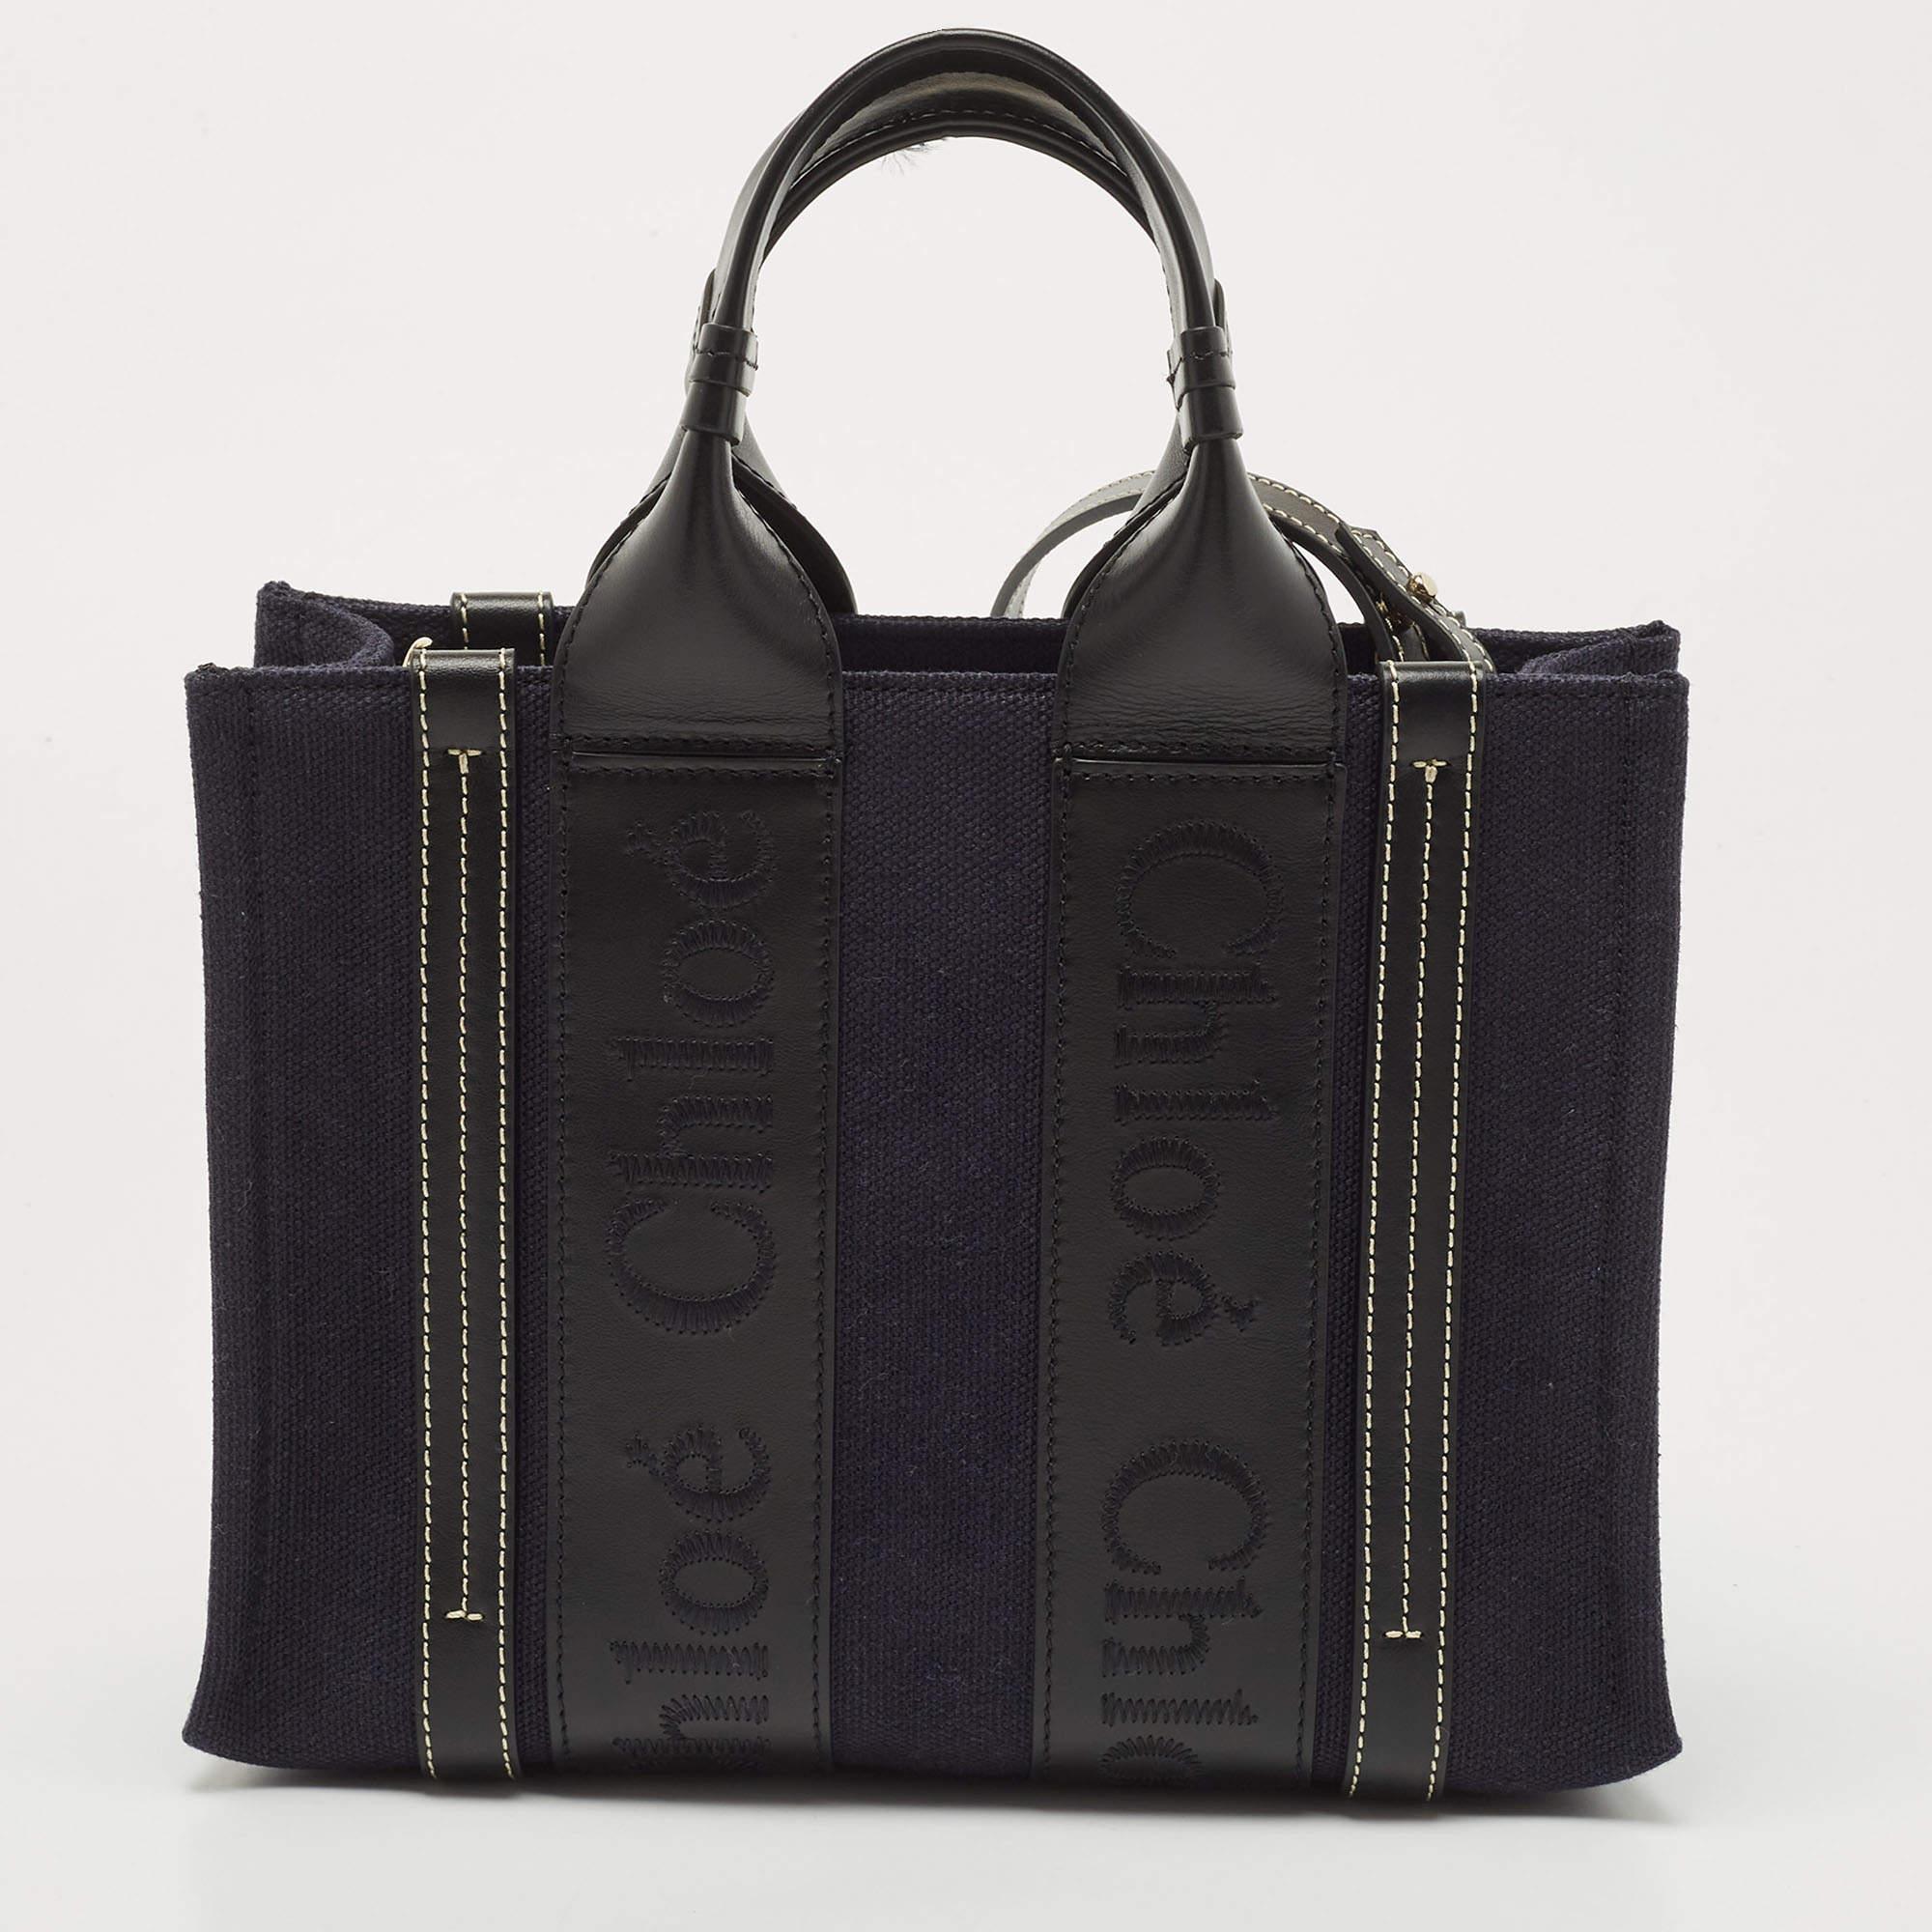 If you like traveling light, then this Chloe Woody tote is an ideal option for you. It is the ultimate favorite of the fashion elite because of its versatility and classy appeal. Created from canvas and leather, it exhibits brand-detailed stripes on